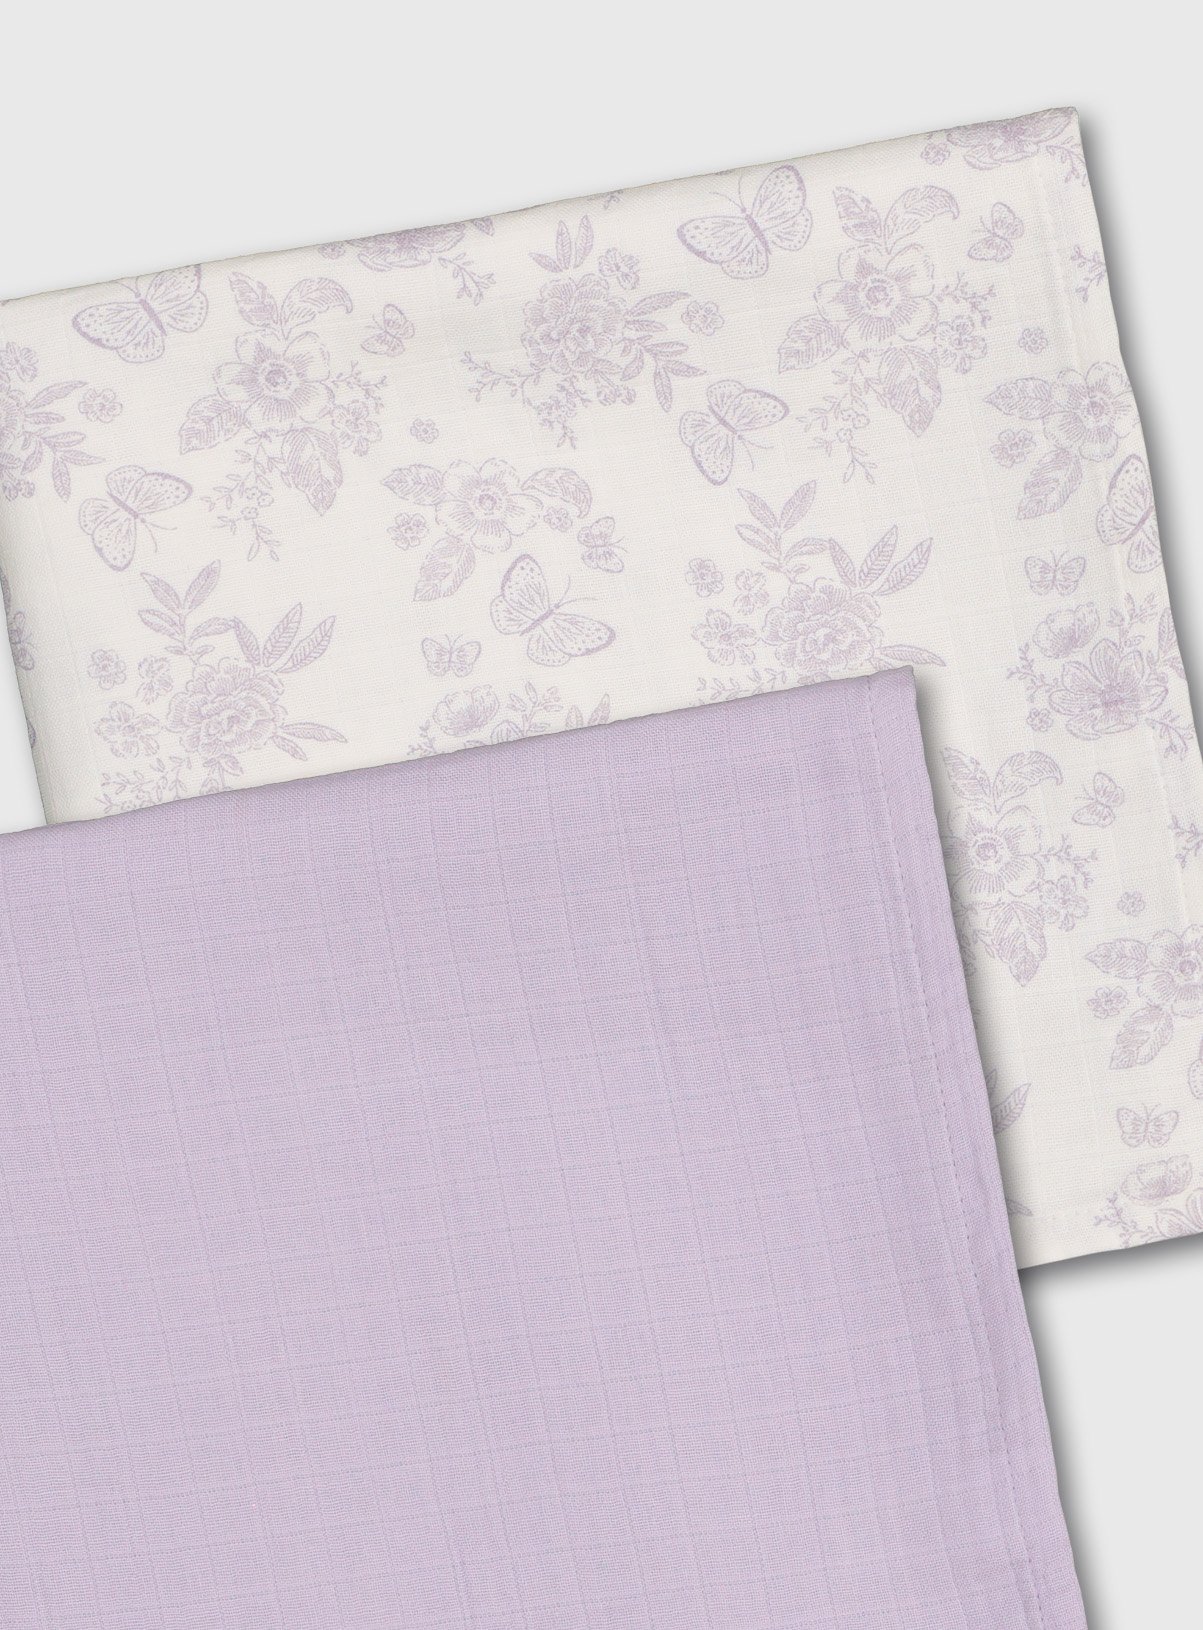 Lilac & Floral Print Extra Large Muslin Square 2 Pack Review